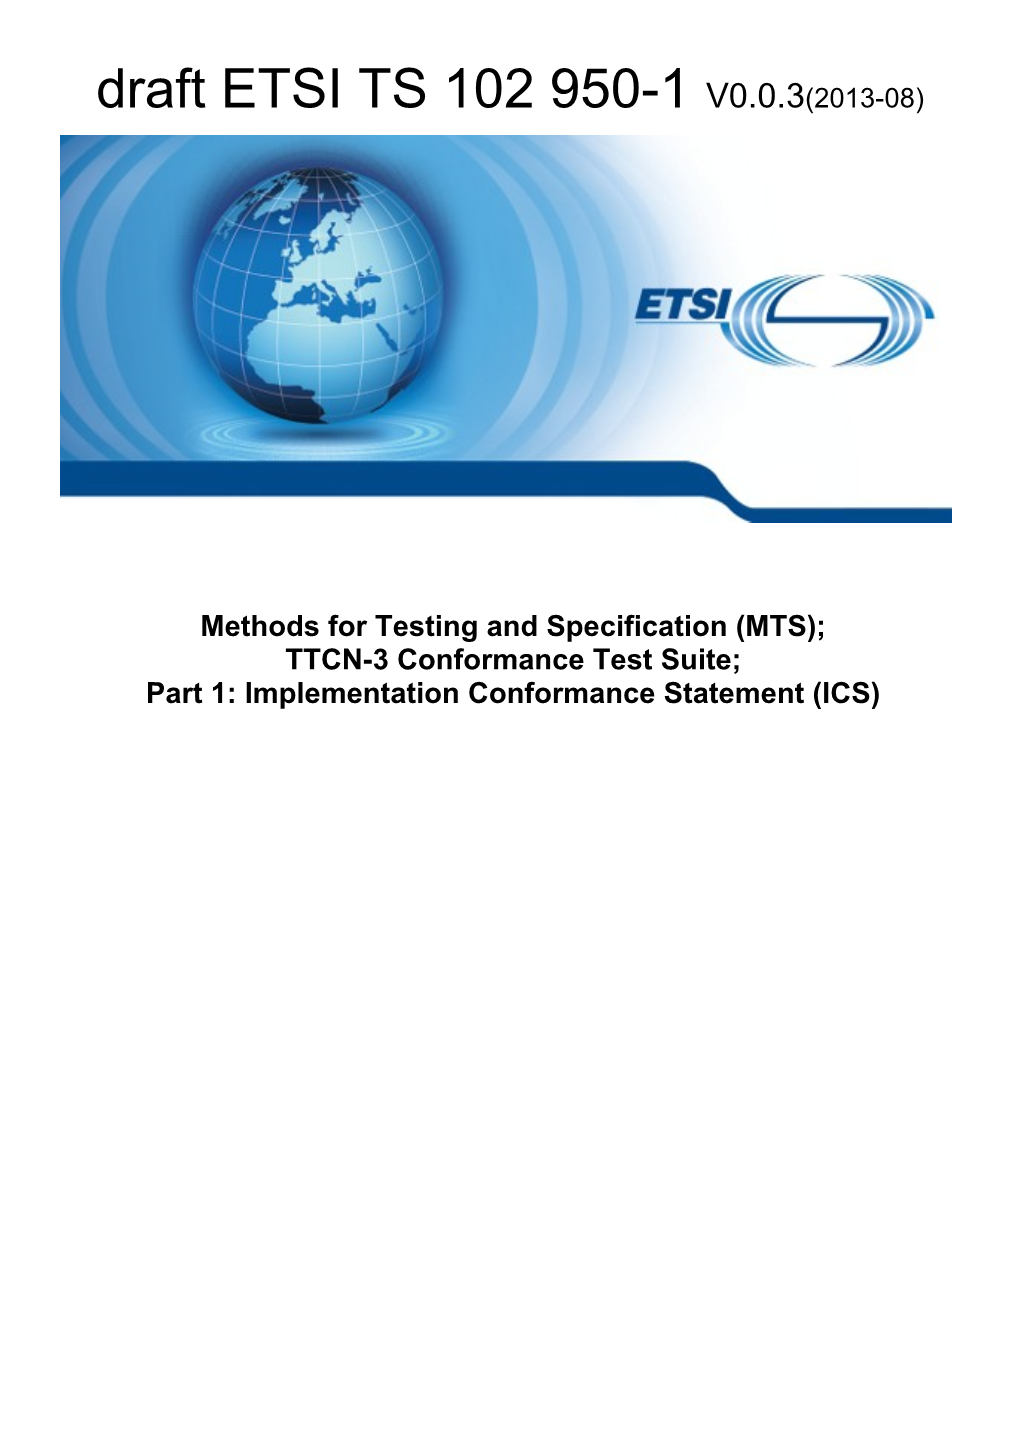 Methods for Testing and Specification (MTS); s4